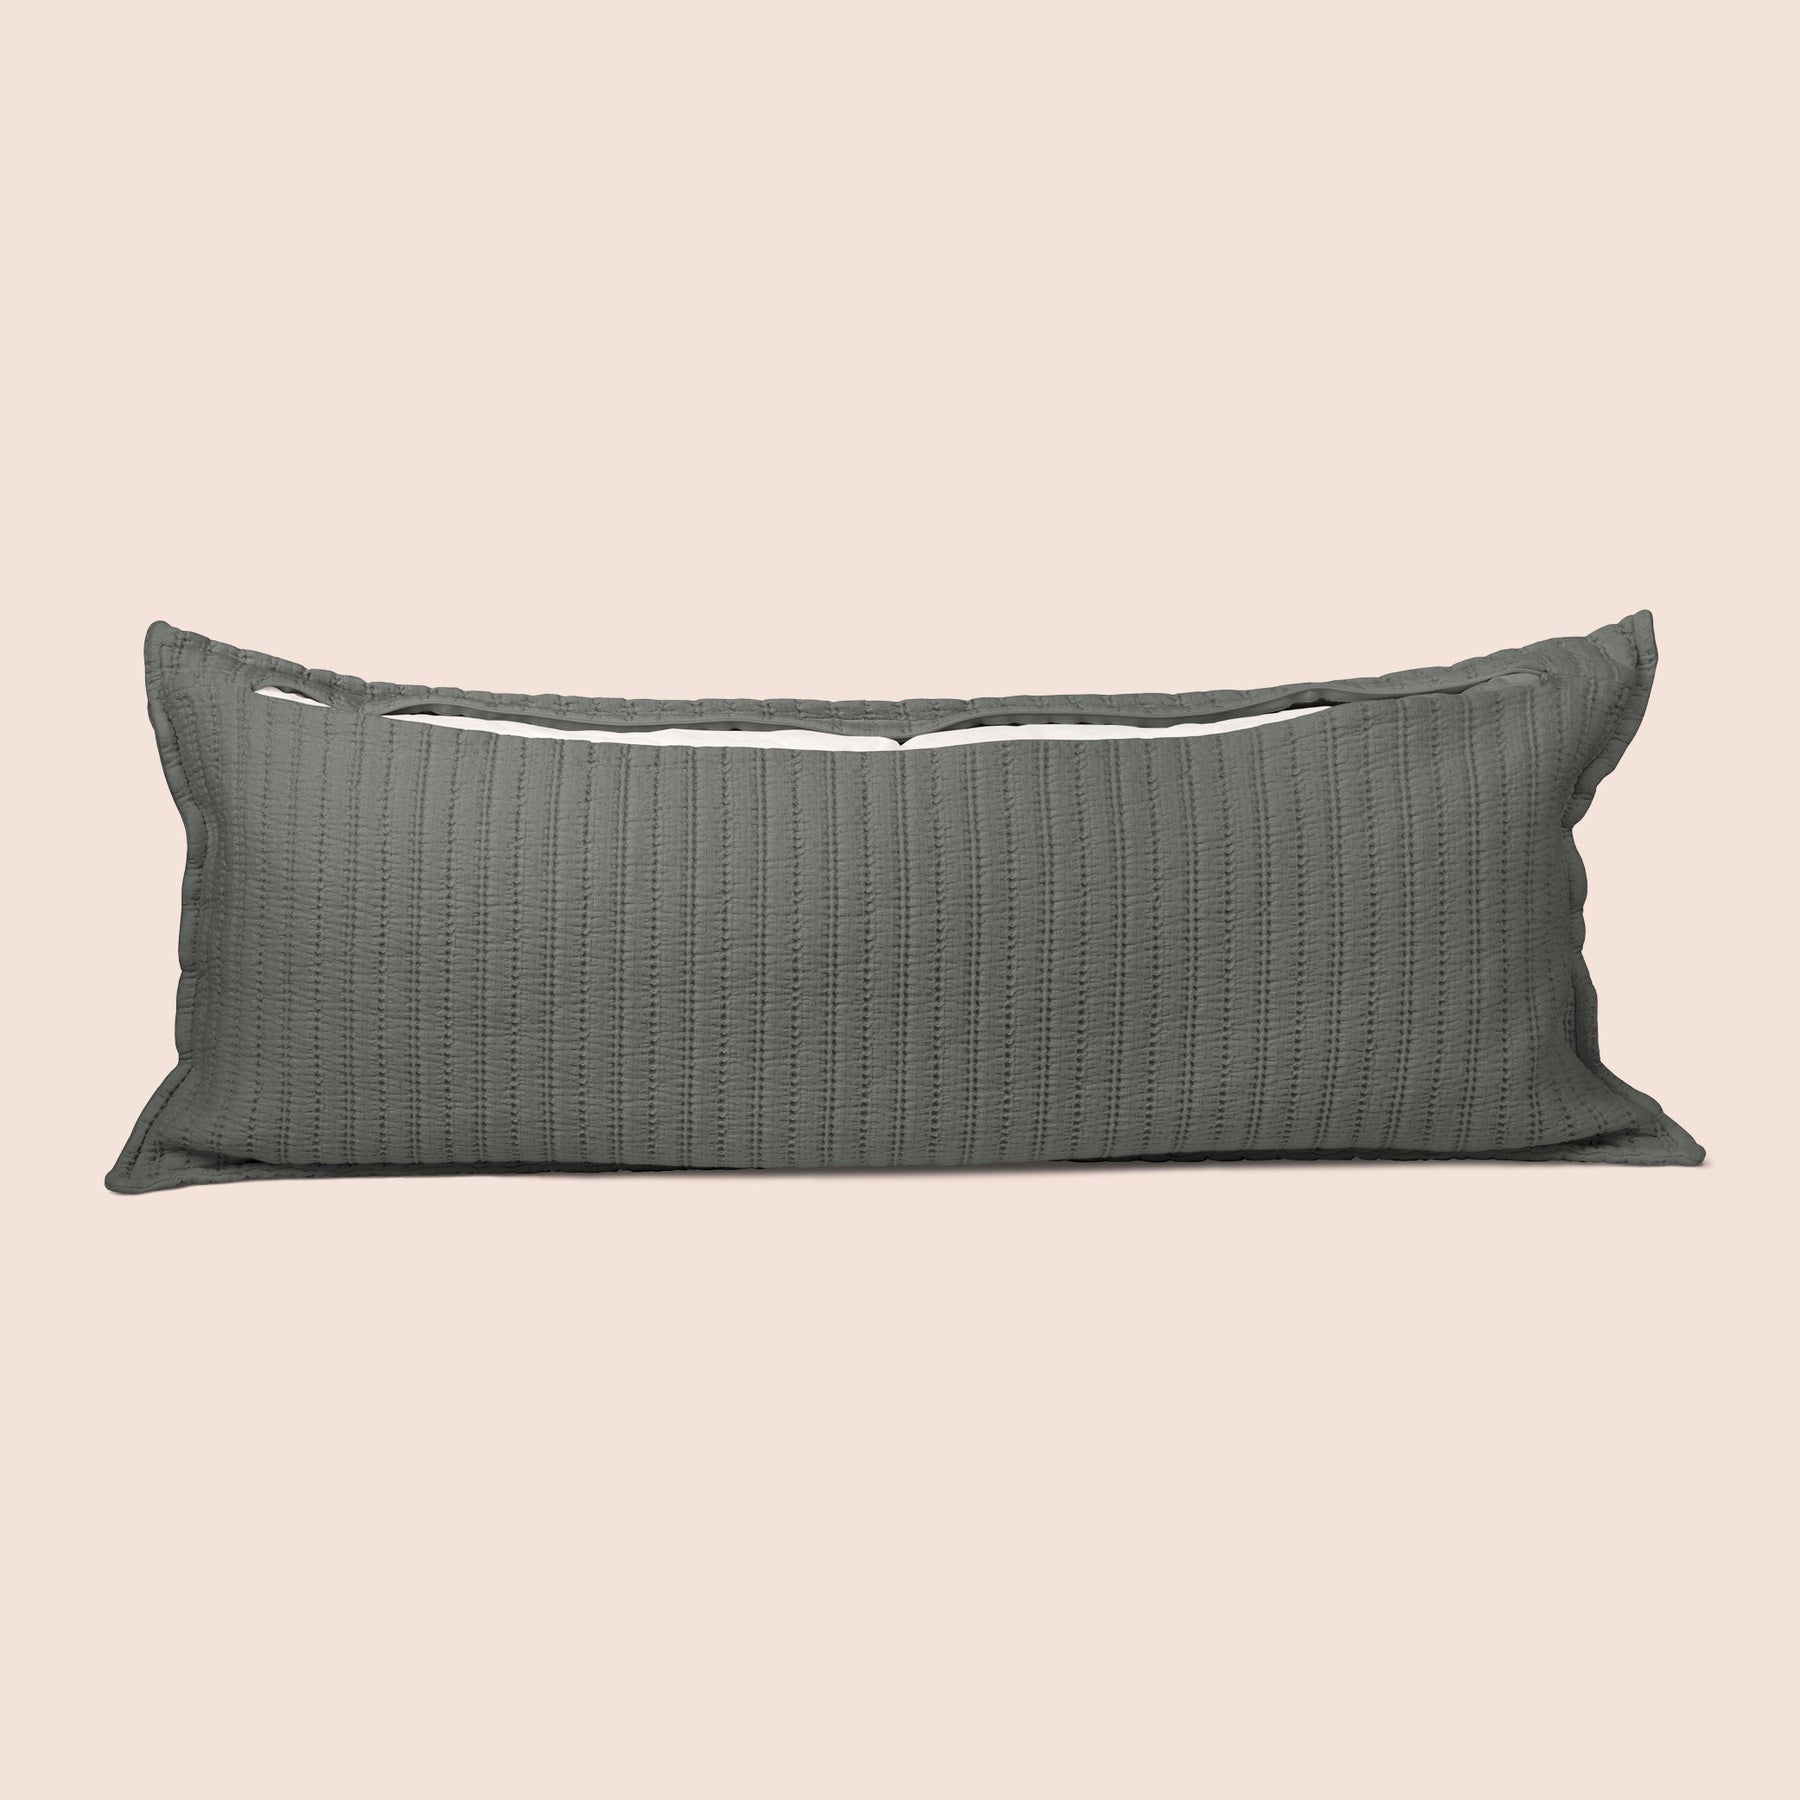 Image of the back of the Agave Ridgeback Lumbar Pillow Cover on a lumbar pillow with the back zipper open on a light pink background